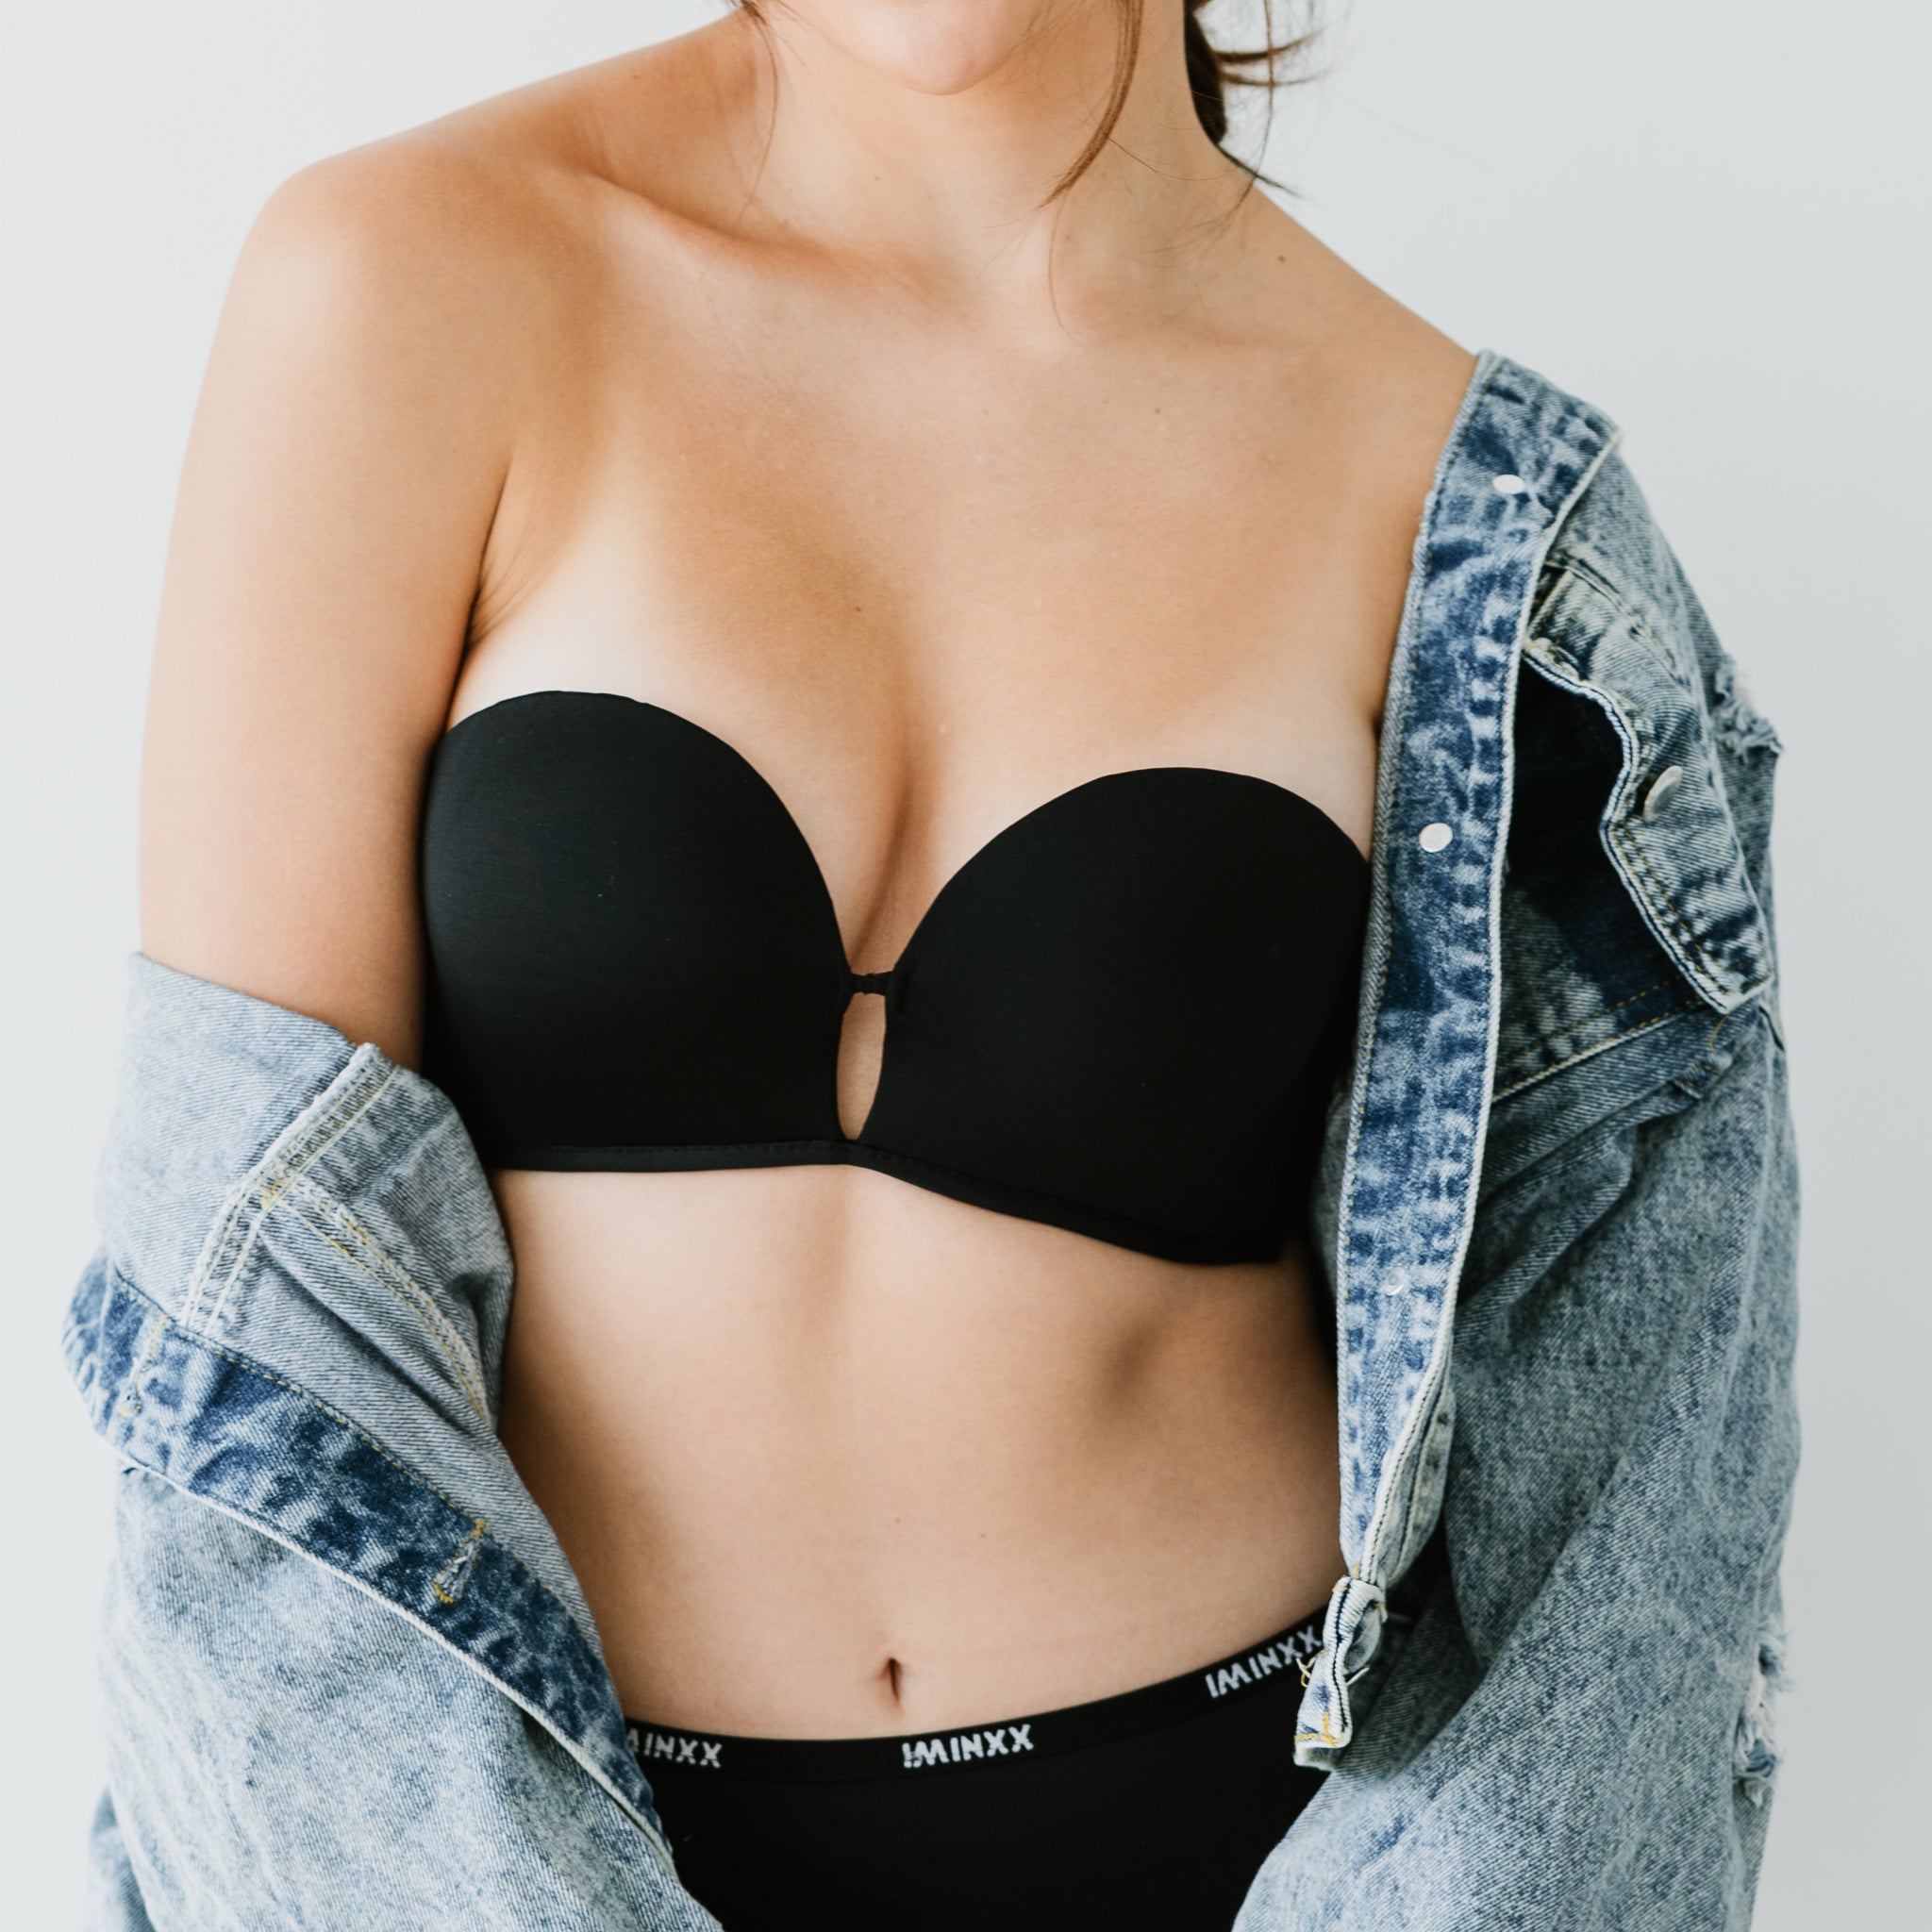 Midnightdivas - Ultimate Strapless Bra Black <3 LKR 2,800/- Say good  riddance to heavy, irritating strapless bras, and hello to our lightweight,  Up for Anything Ultimate Strapless Bra! Thanks to our innovative